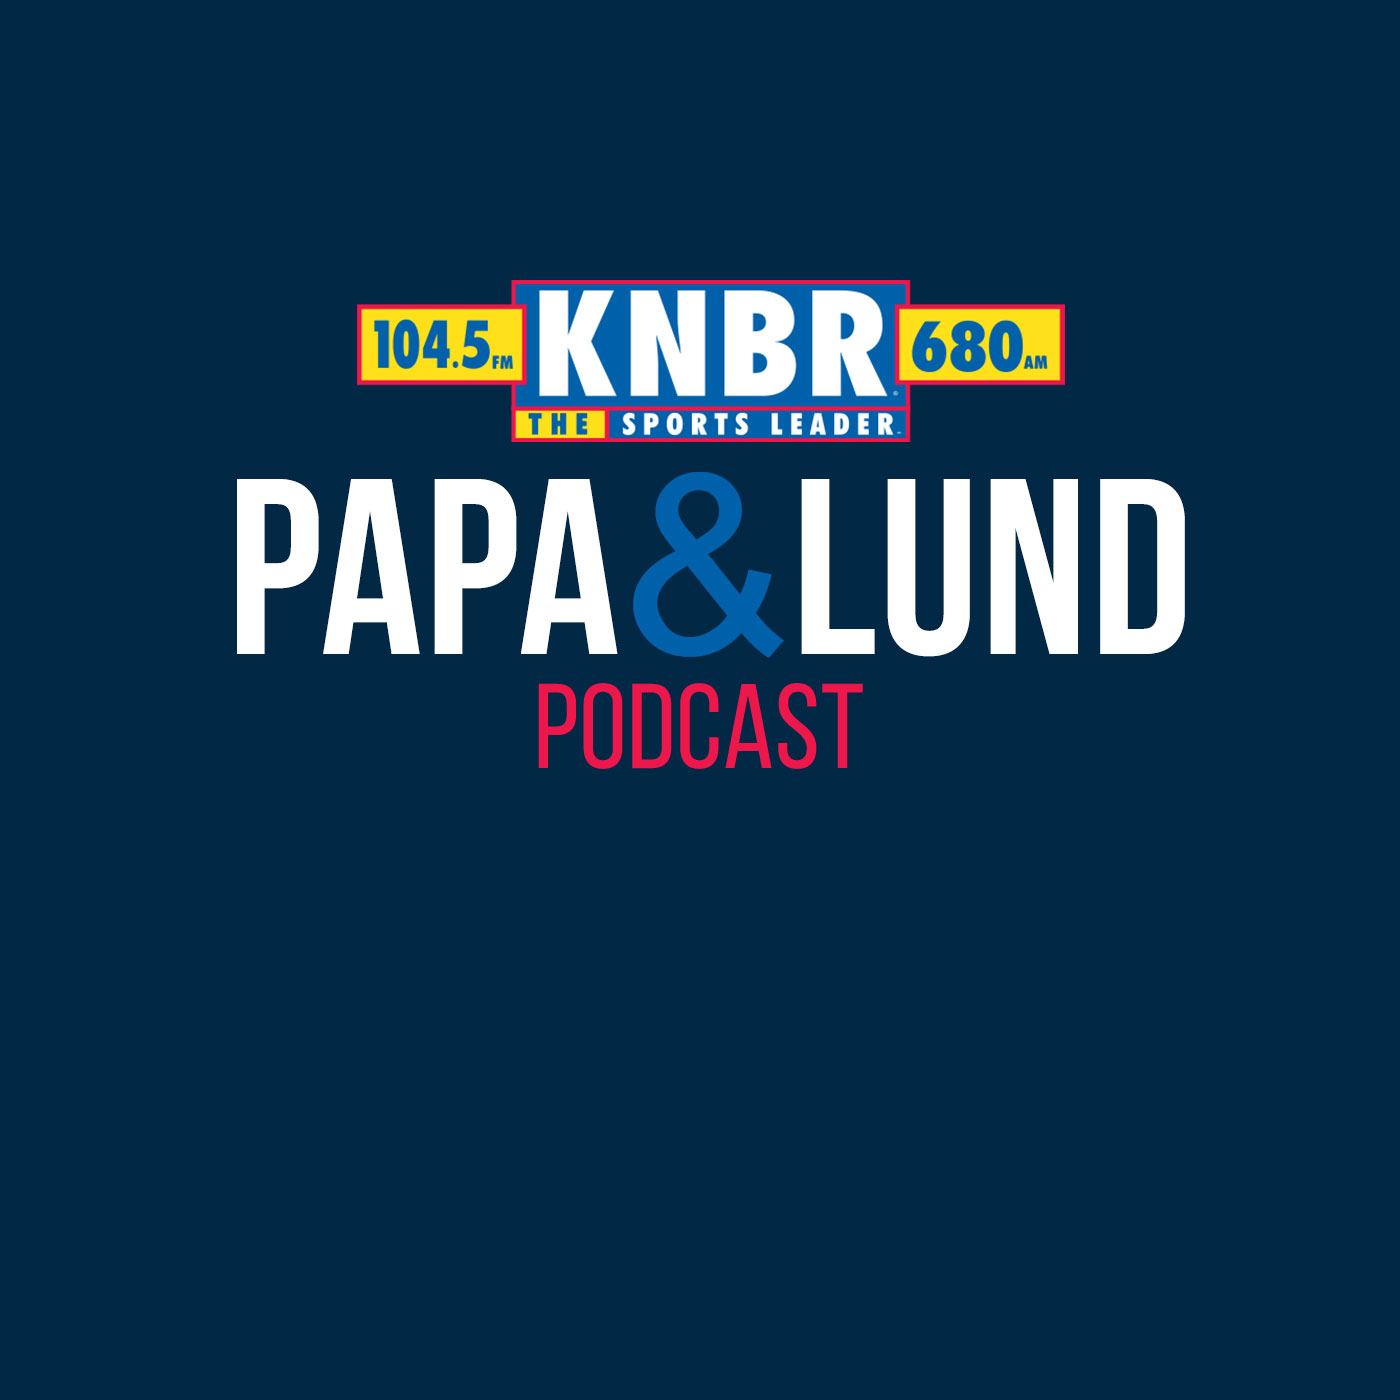 3-15 Andrew Baggarly joins Papa & Lund to discuss how the Giants will fill out the rotation to start the season